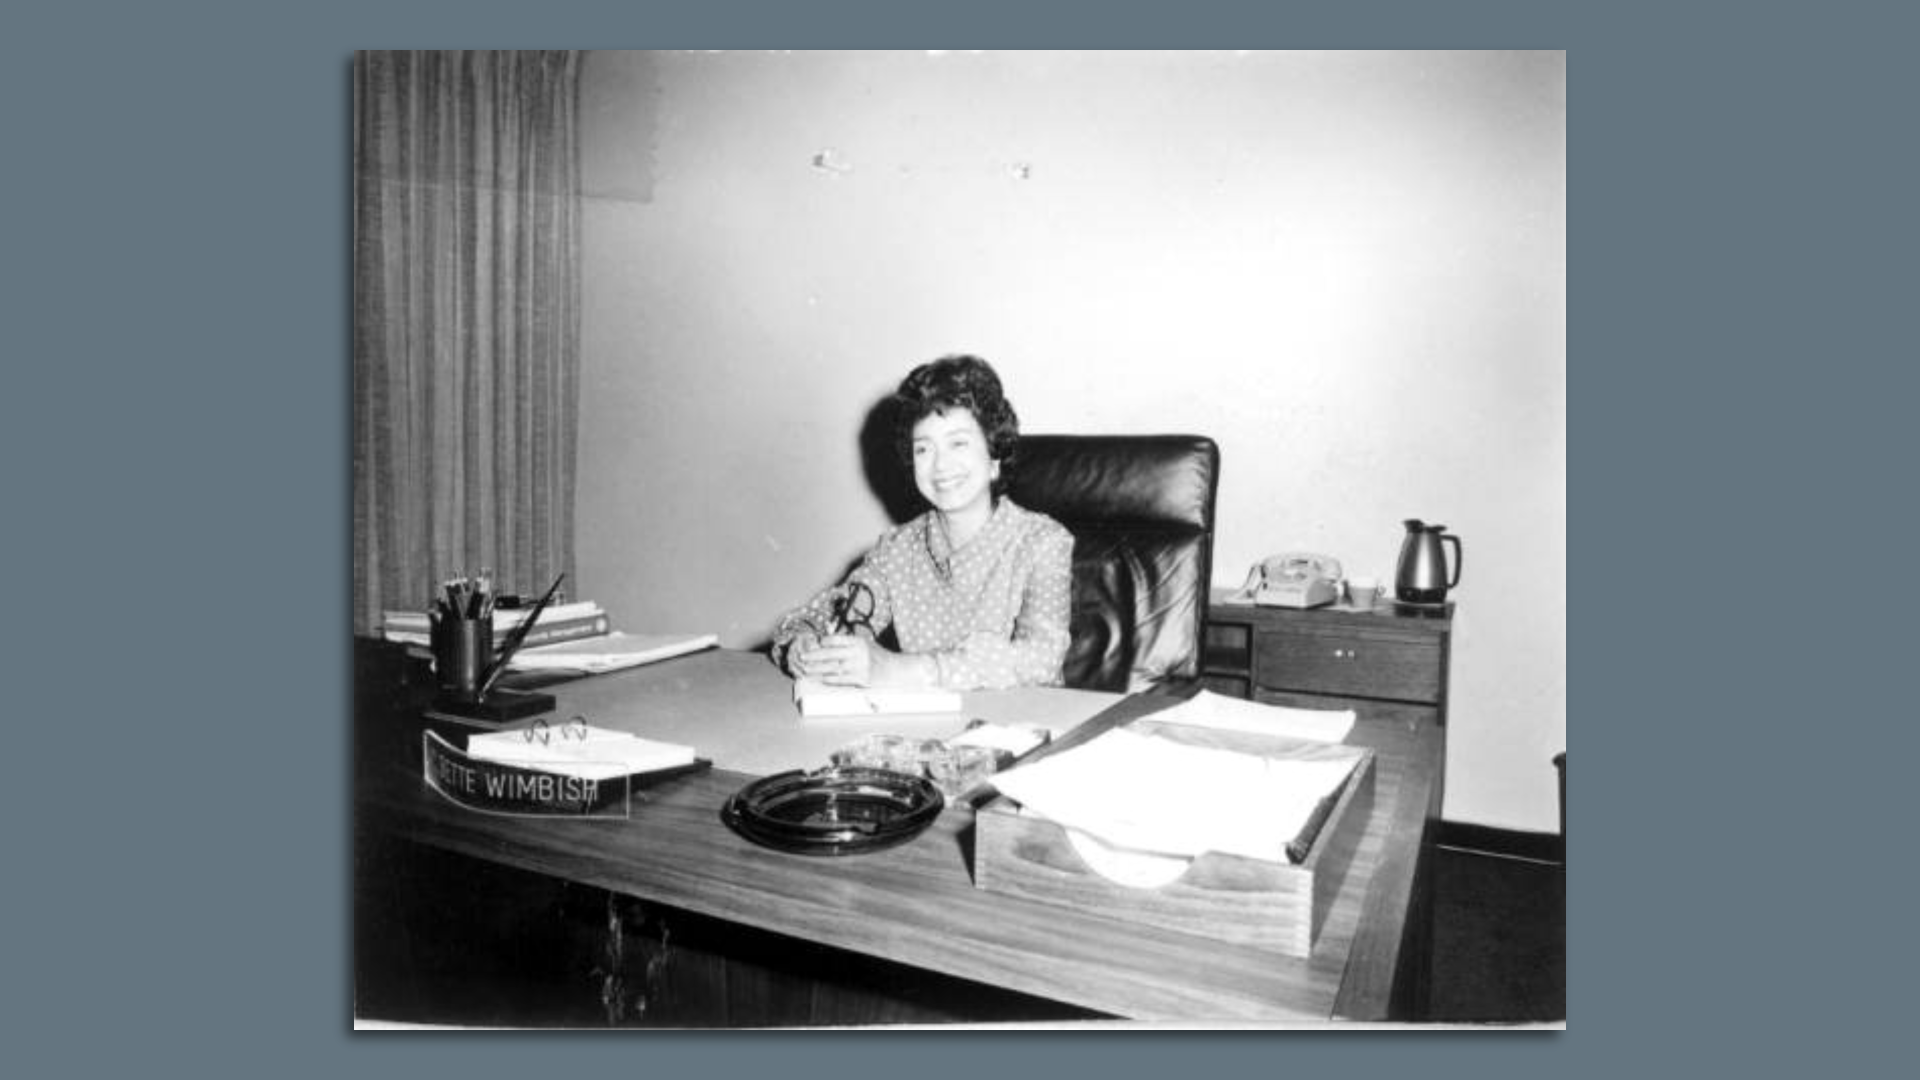 C. Bette Wimbish sits at a desk